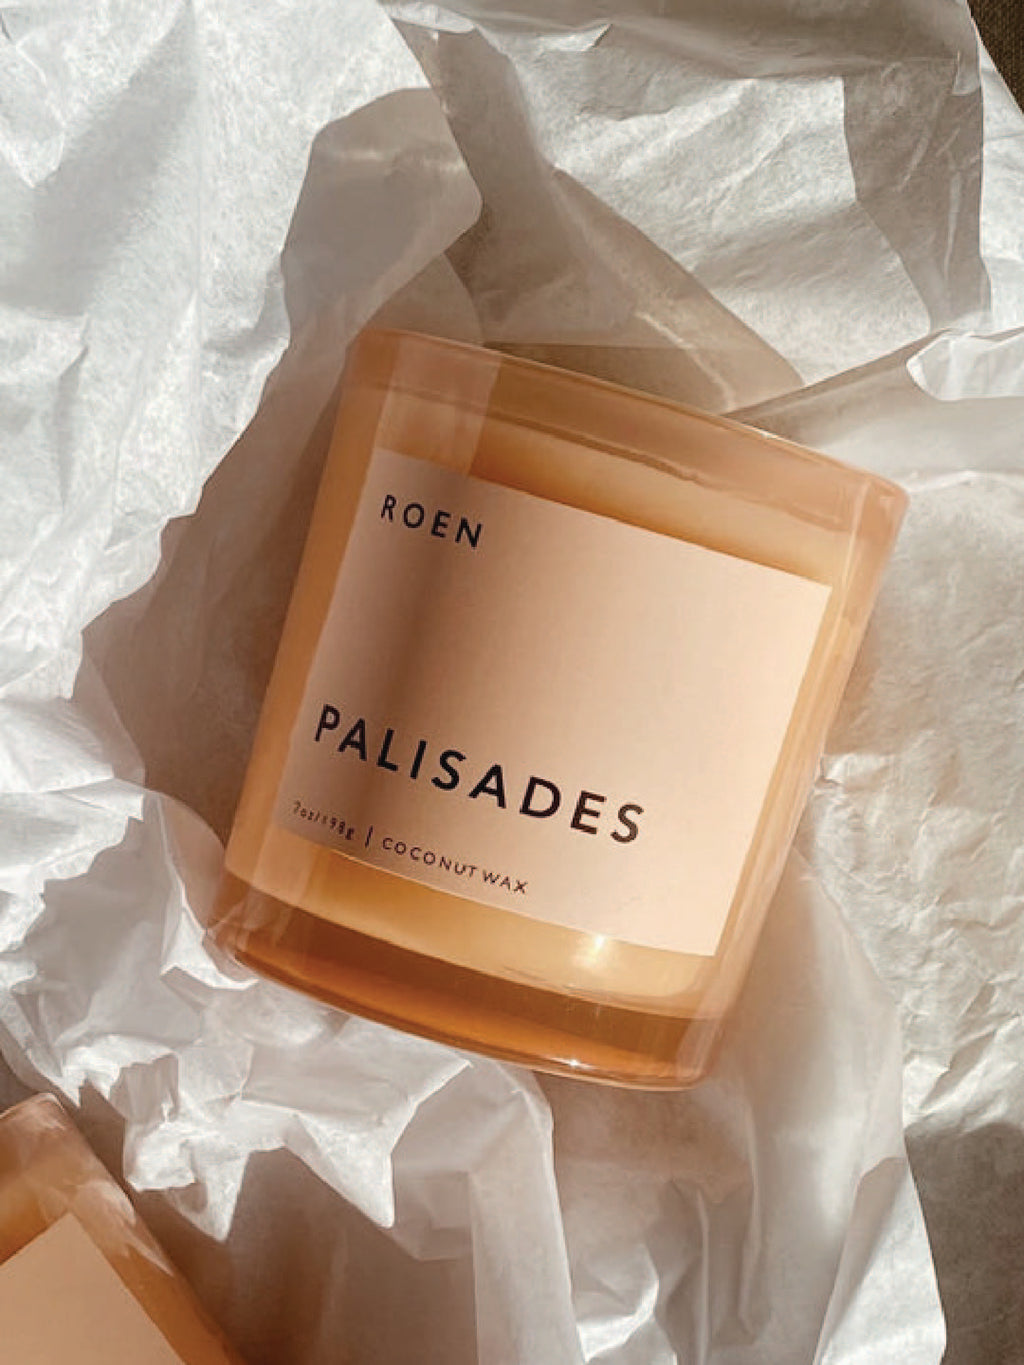 Palisades Candle by Roen